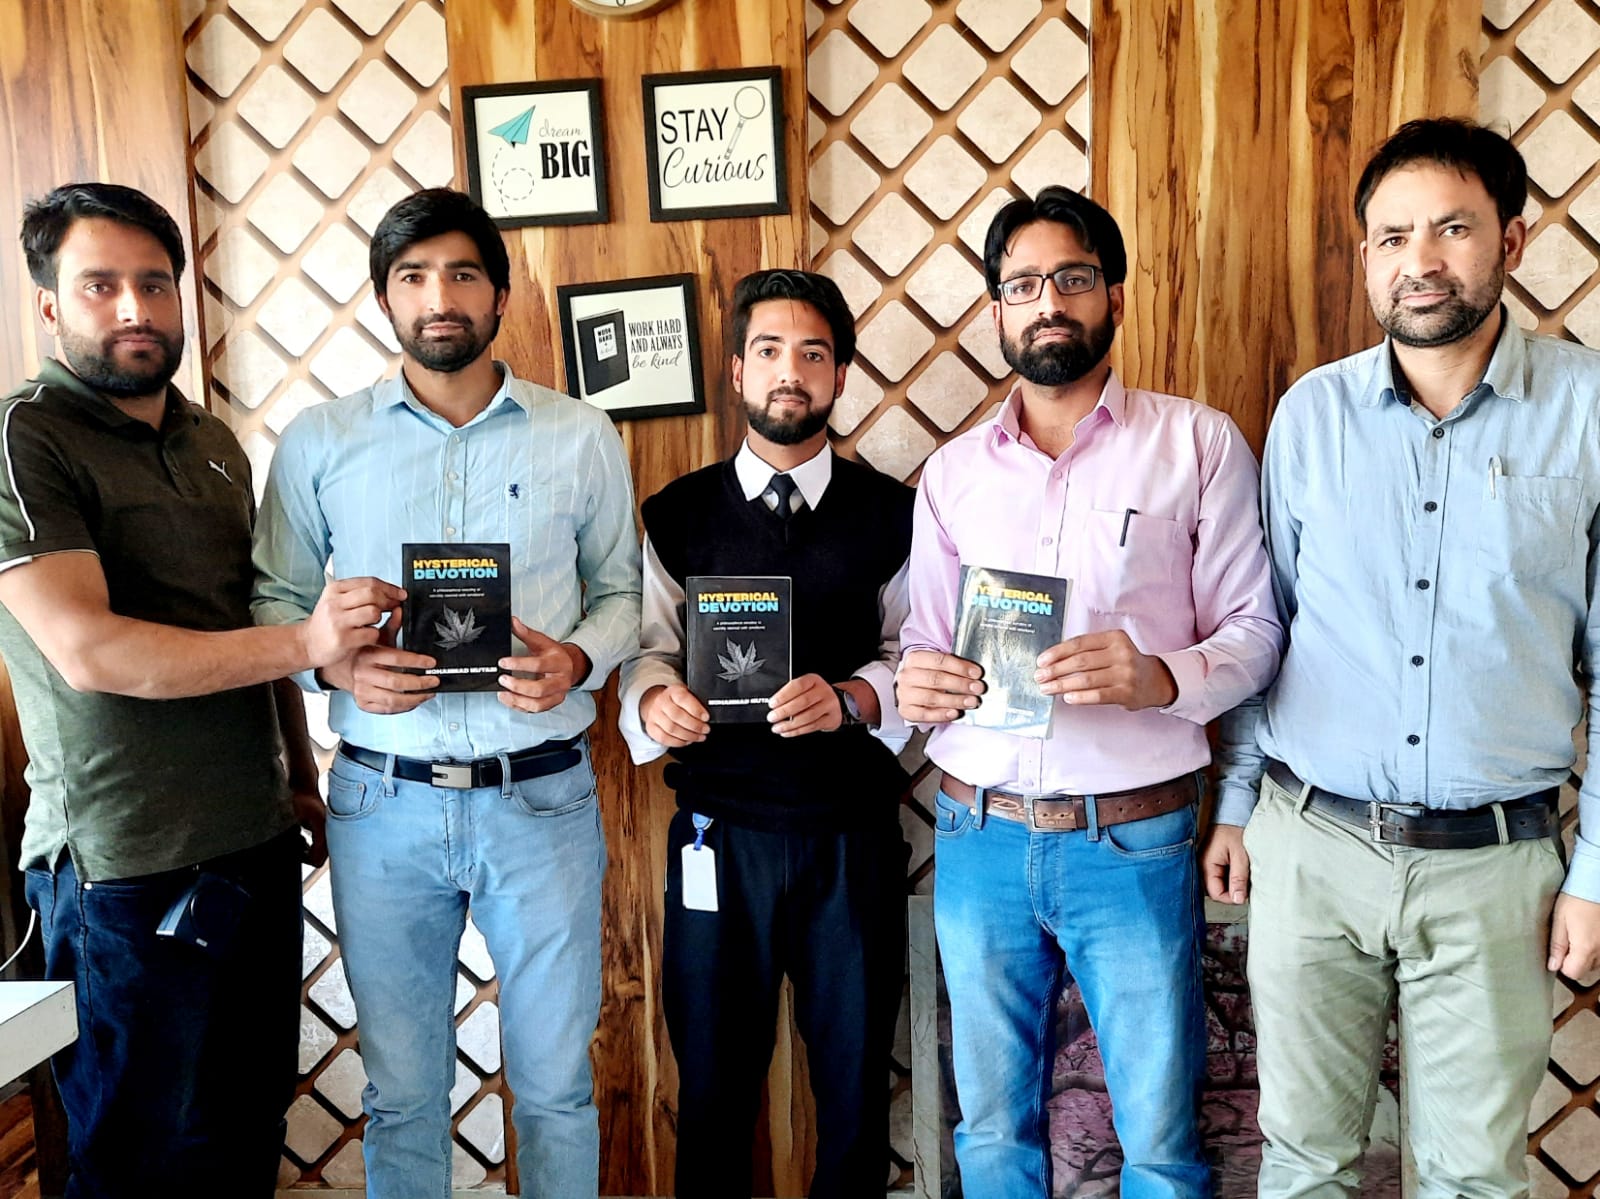 Mohammad Mutaib : The author and the youngest Urdu Poet from Anantnag, J&K